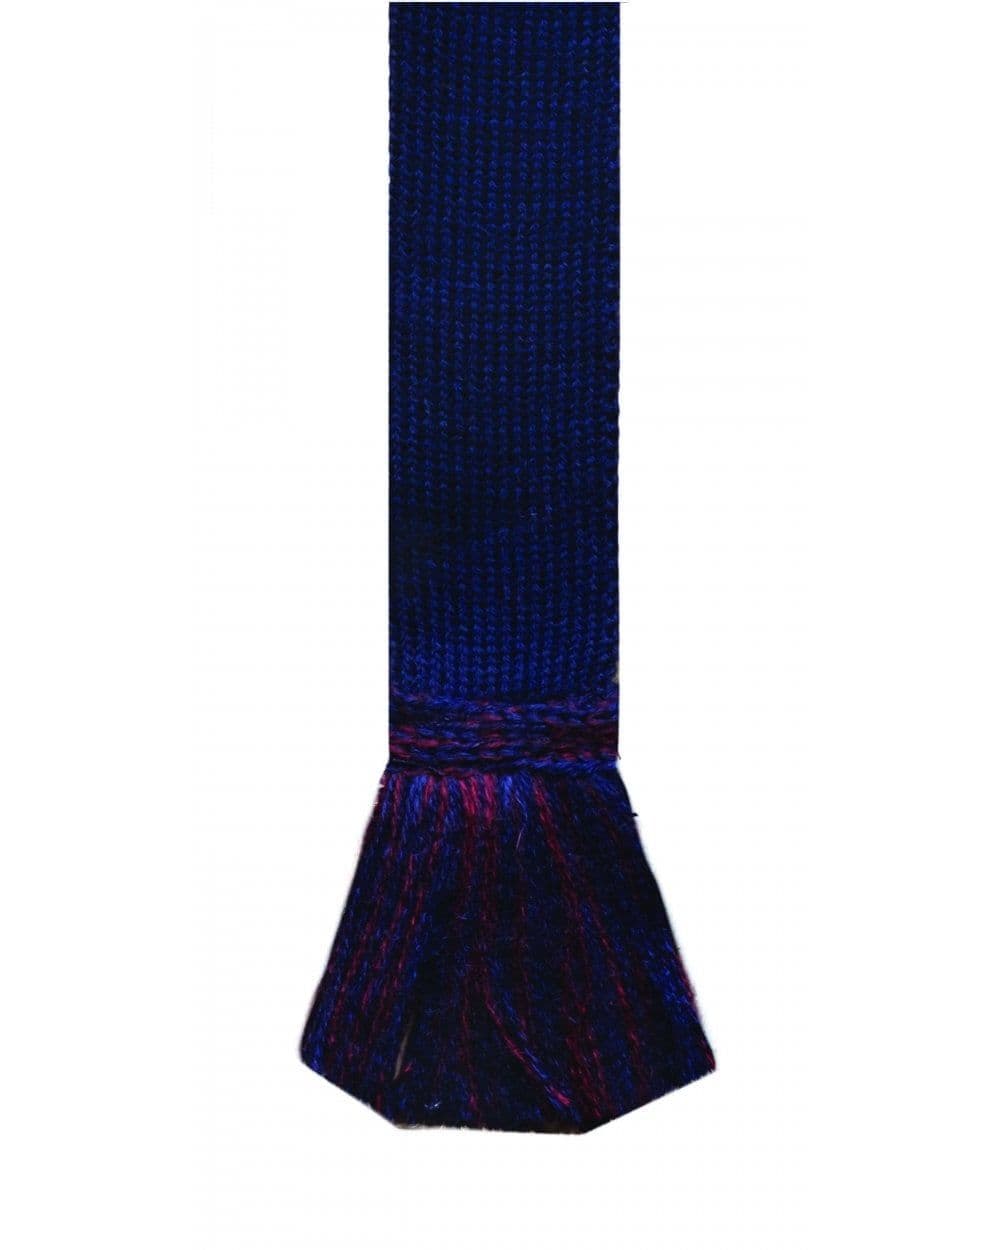 House Of Cheviot Classic Garter Ties - Navy and Burgundy